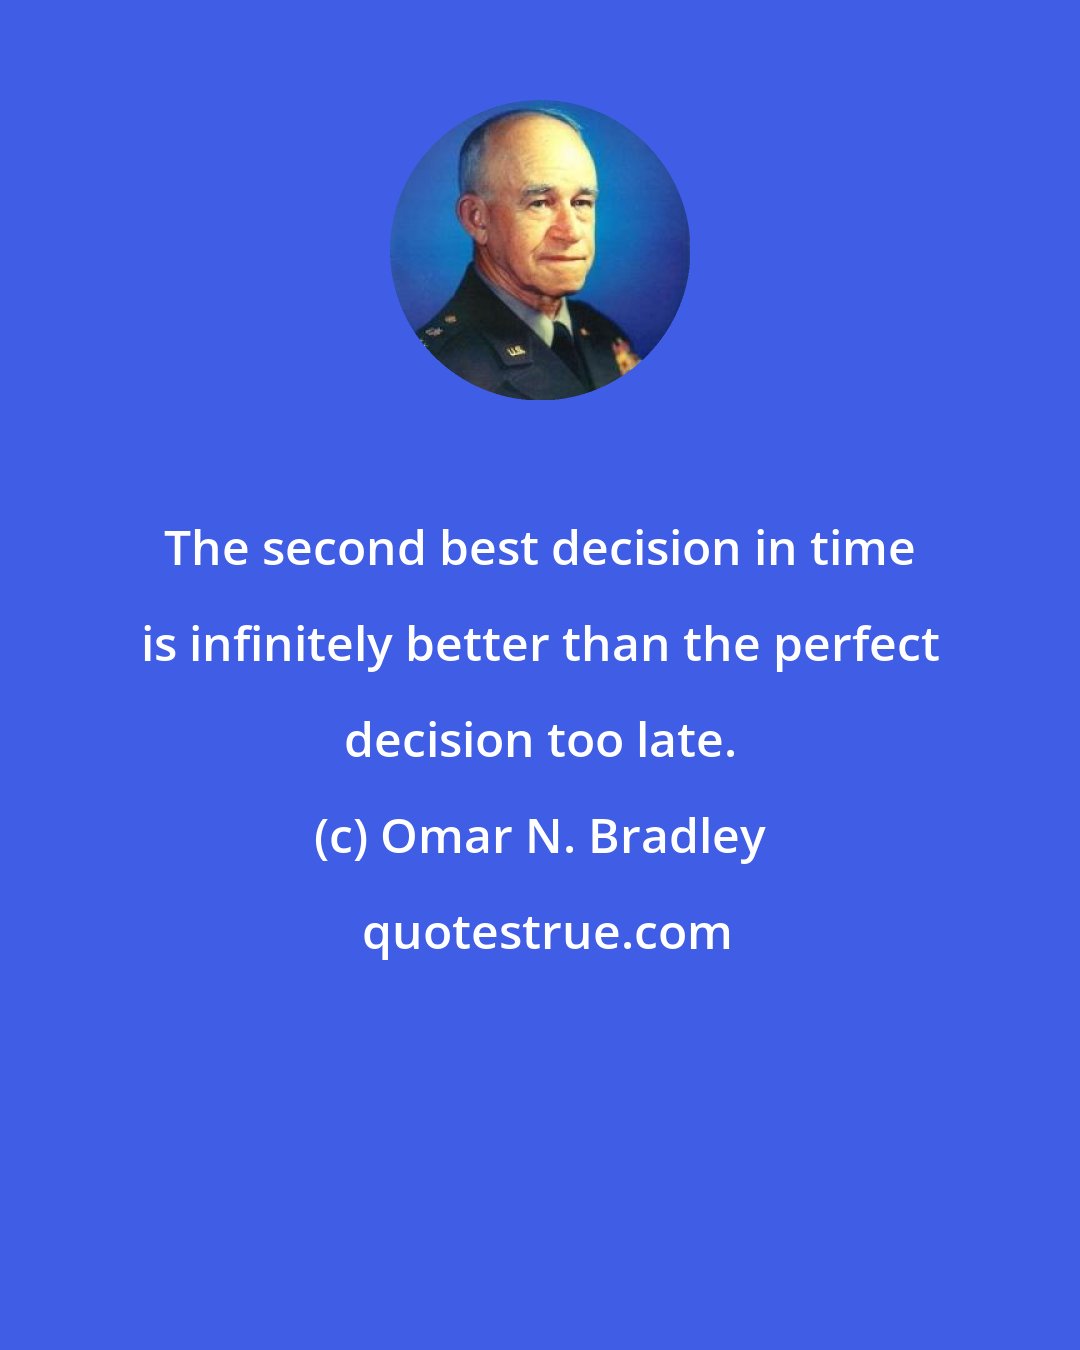 Omar N. Bradley: The second best decision in time is infinitely better than the perfect decision too late.